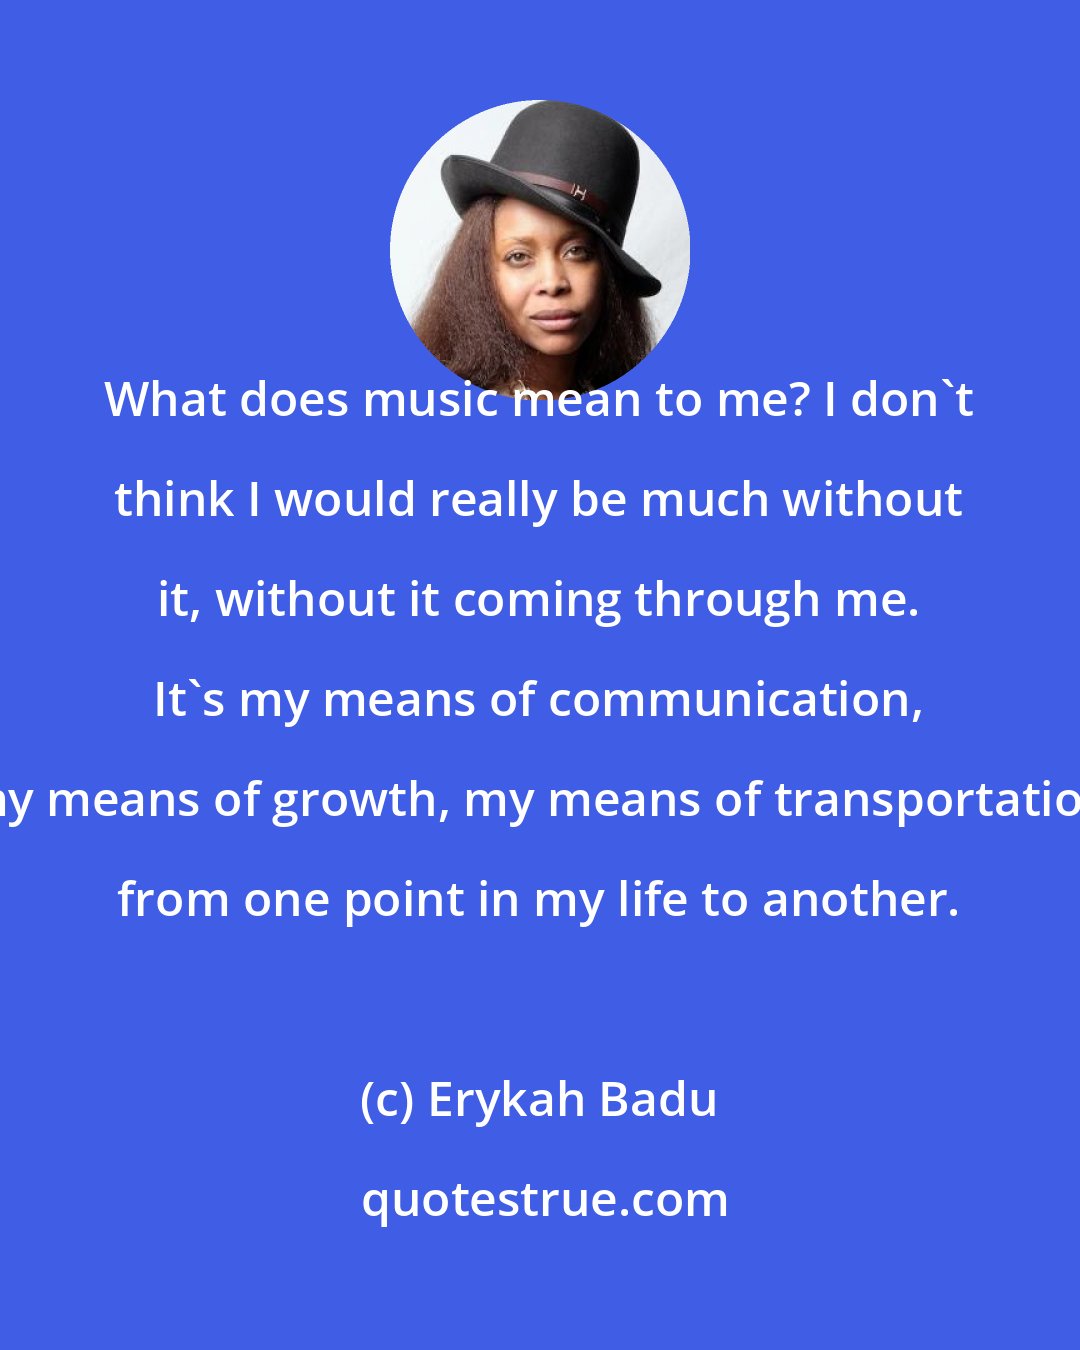 Erykah Badu: What does music mean to me? I don't think I would really be much without it, without it coming through me. It's my means of communication, my means of growth, my means of transportation from one point in my life to another.